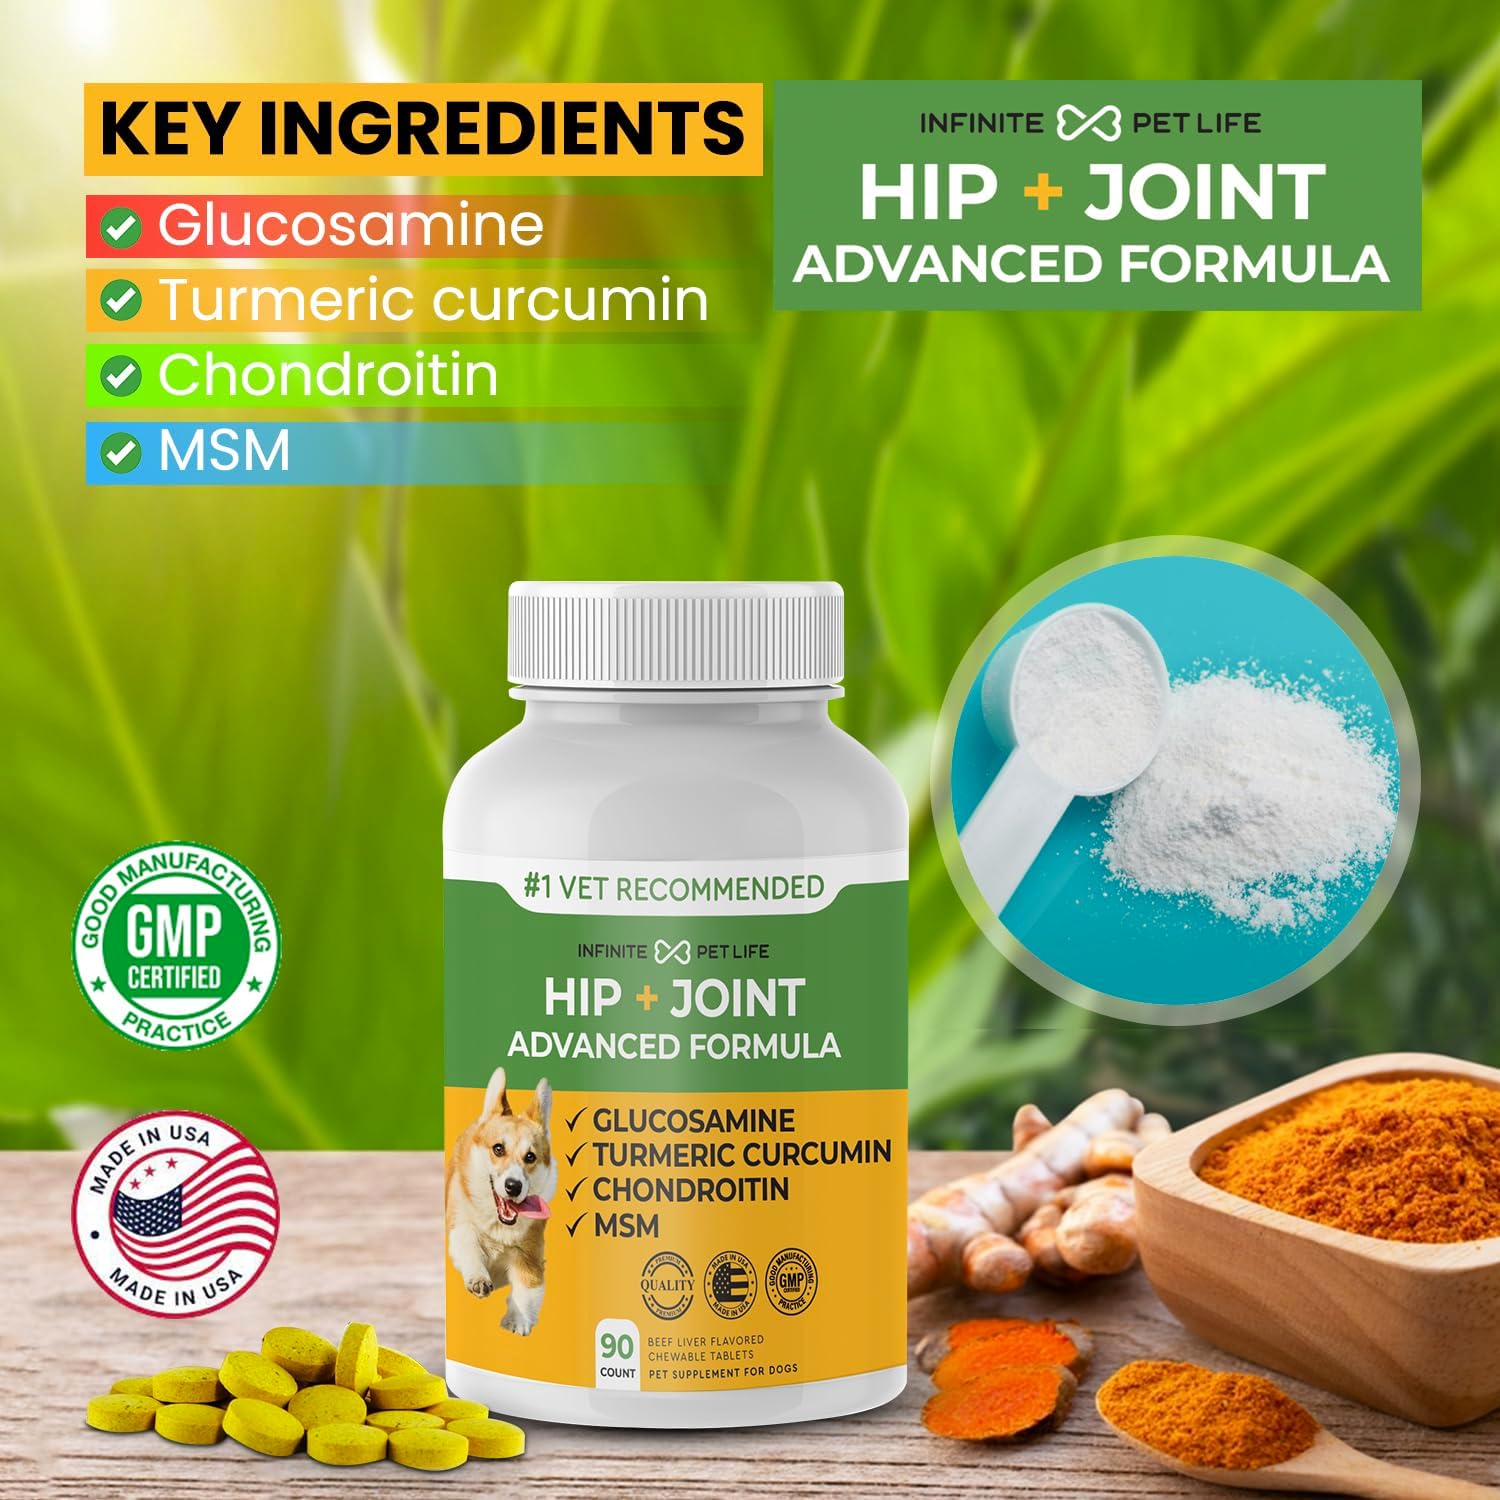 Advanced Hip & Joint Formula - 90 Mobility & Pain Relief Dog Chews - Glucosamine, Chondroitin, MSM, & Turmeric for Superior Joint Health : Pet Supplies